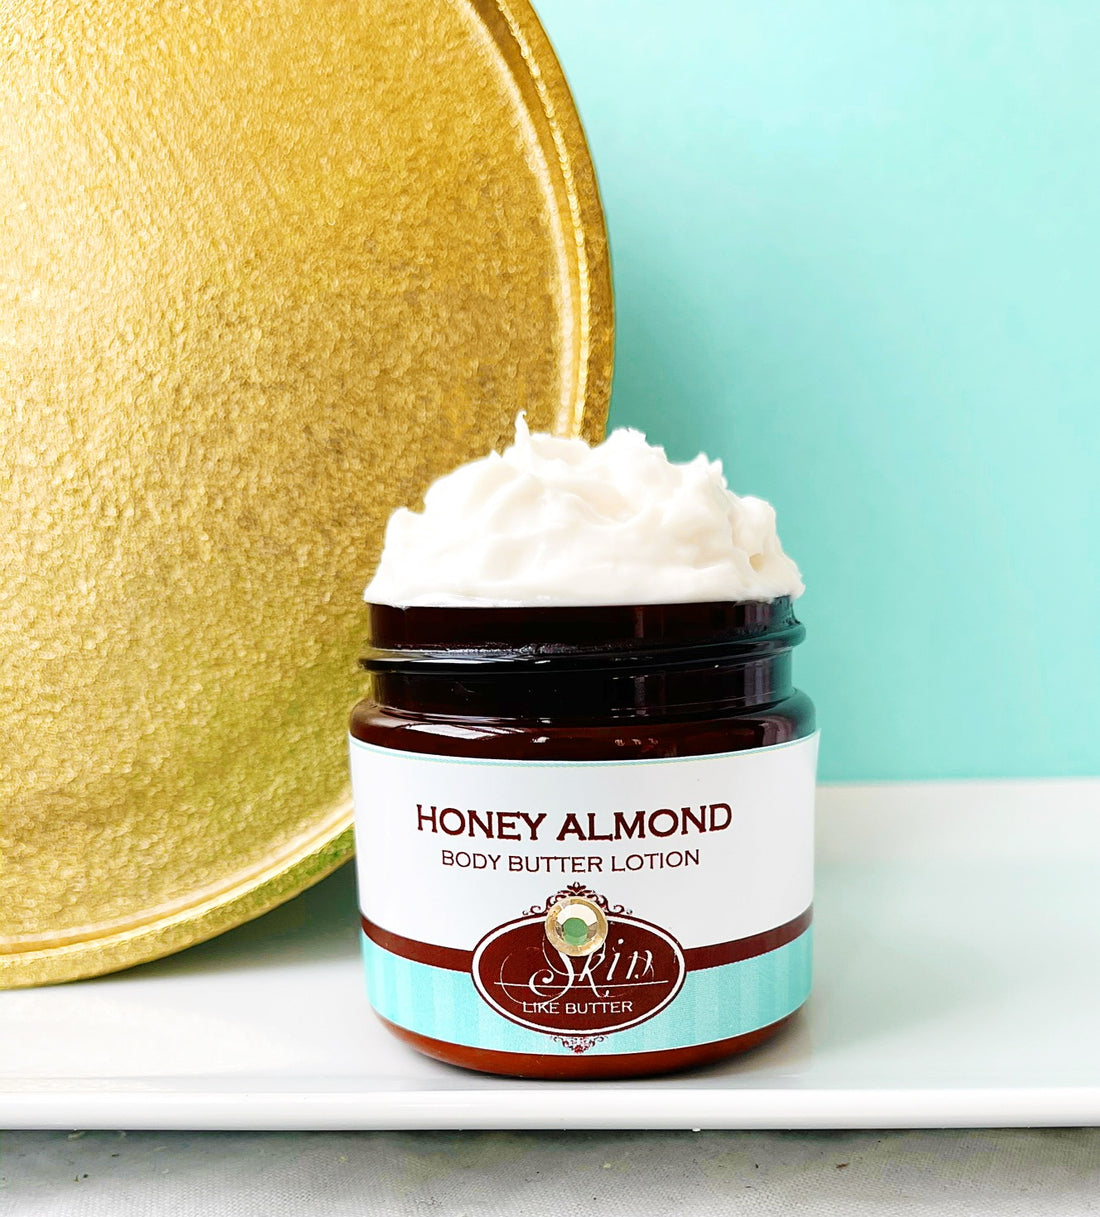 HONEY ALMOND  Body Butter Lotion 2 oz, 4oz, and 8oz